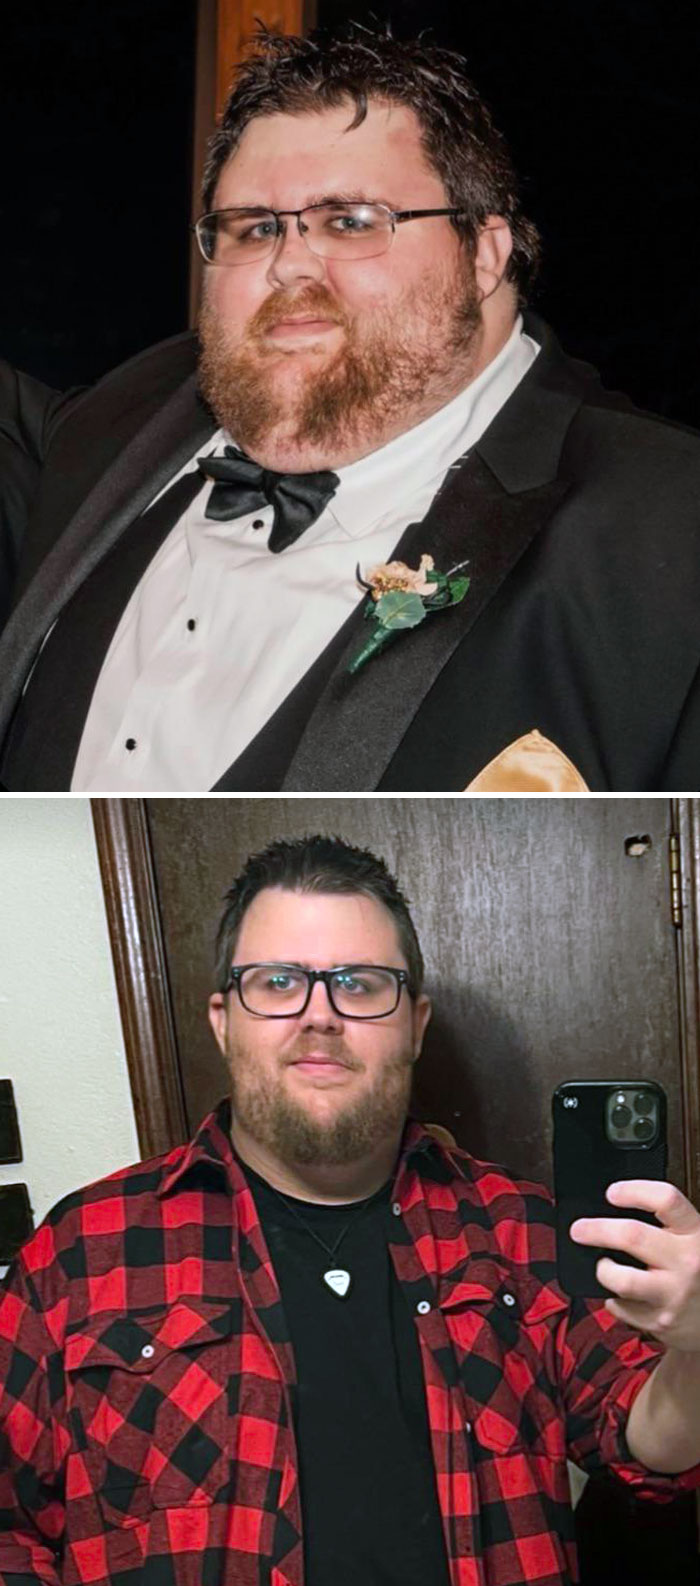 Before vs. After. I'm Not There Yet, But Down To 115 Pounds